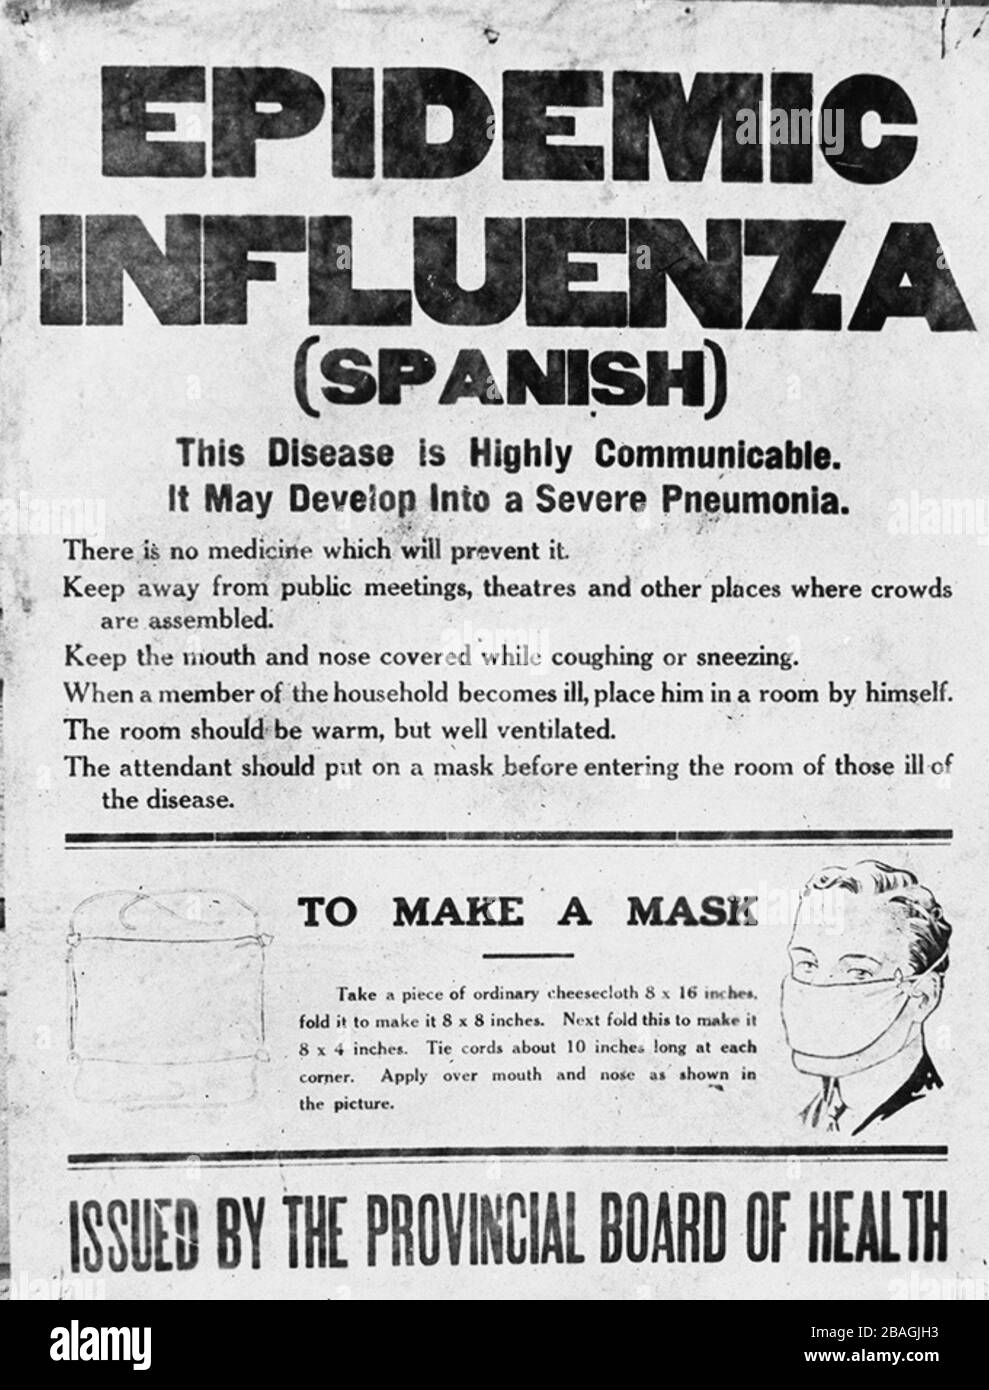 Spanish Flu poster. Poster issued by Alberta's Provincial Board of Health alerting the public to the 1918 influenza epidemic. The poster gives information on the Spanish flu and instructions on how to make a mask. Stock Photo